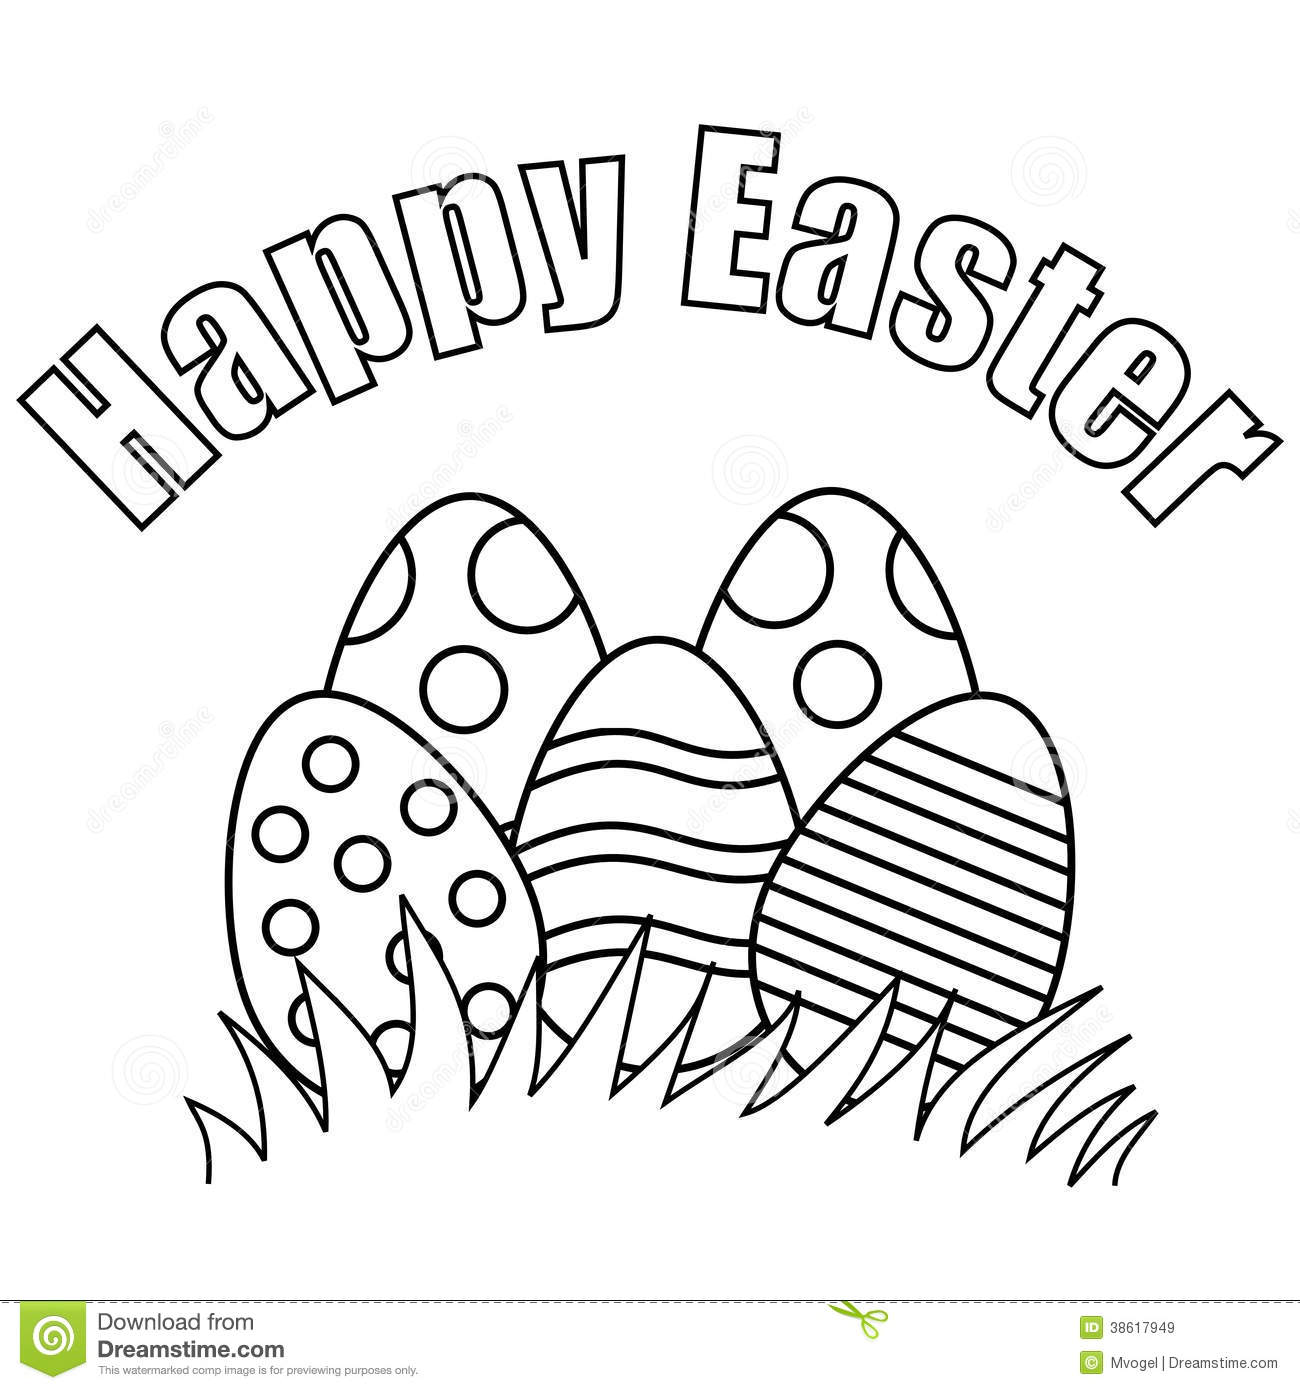 Happy easter clipart black and white